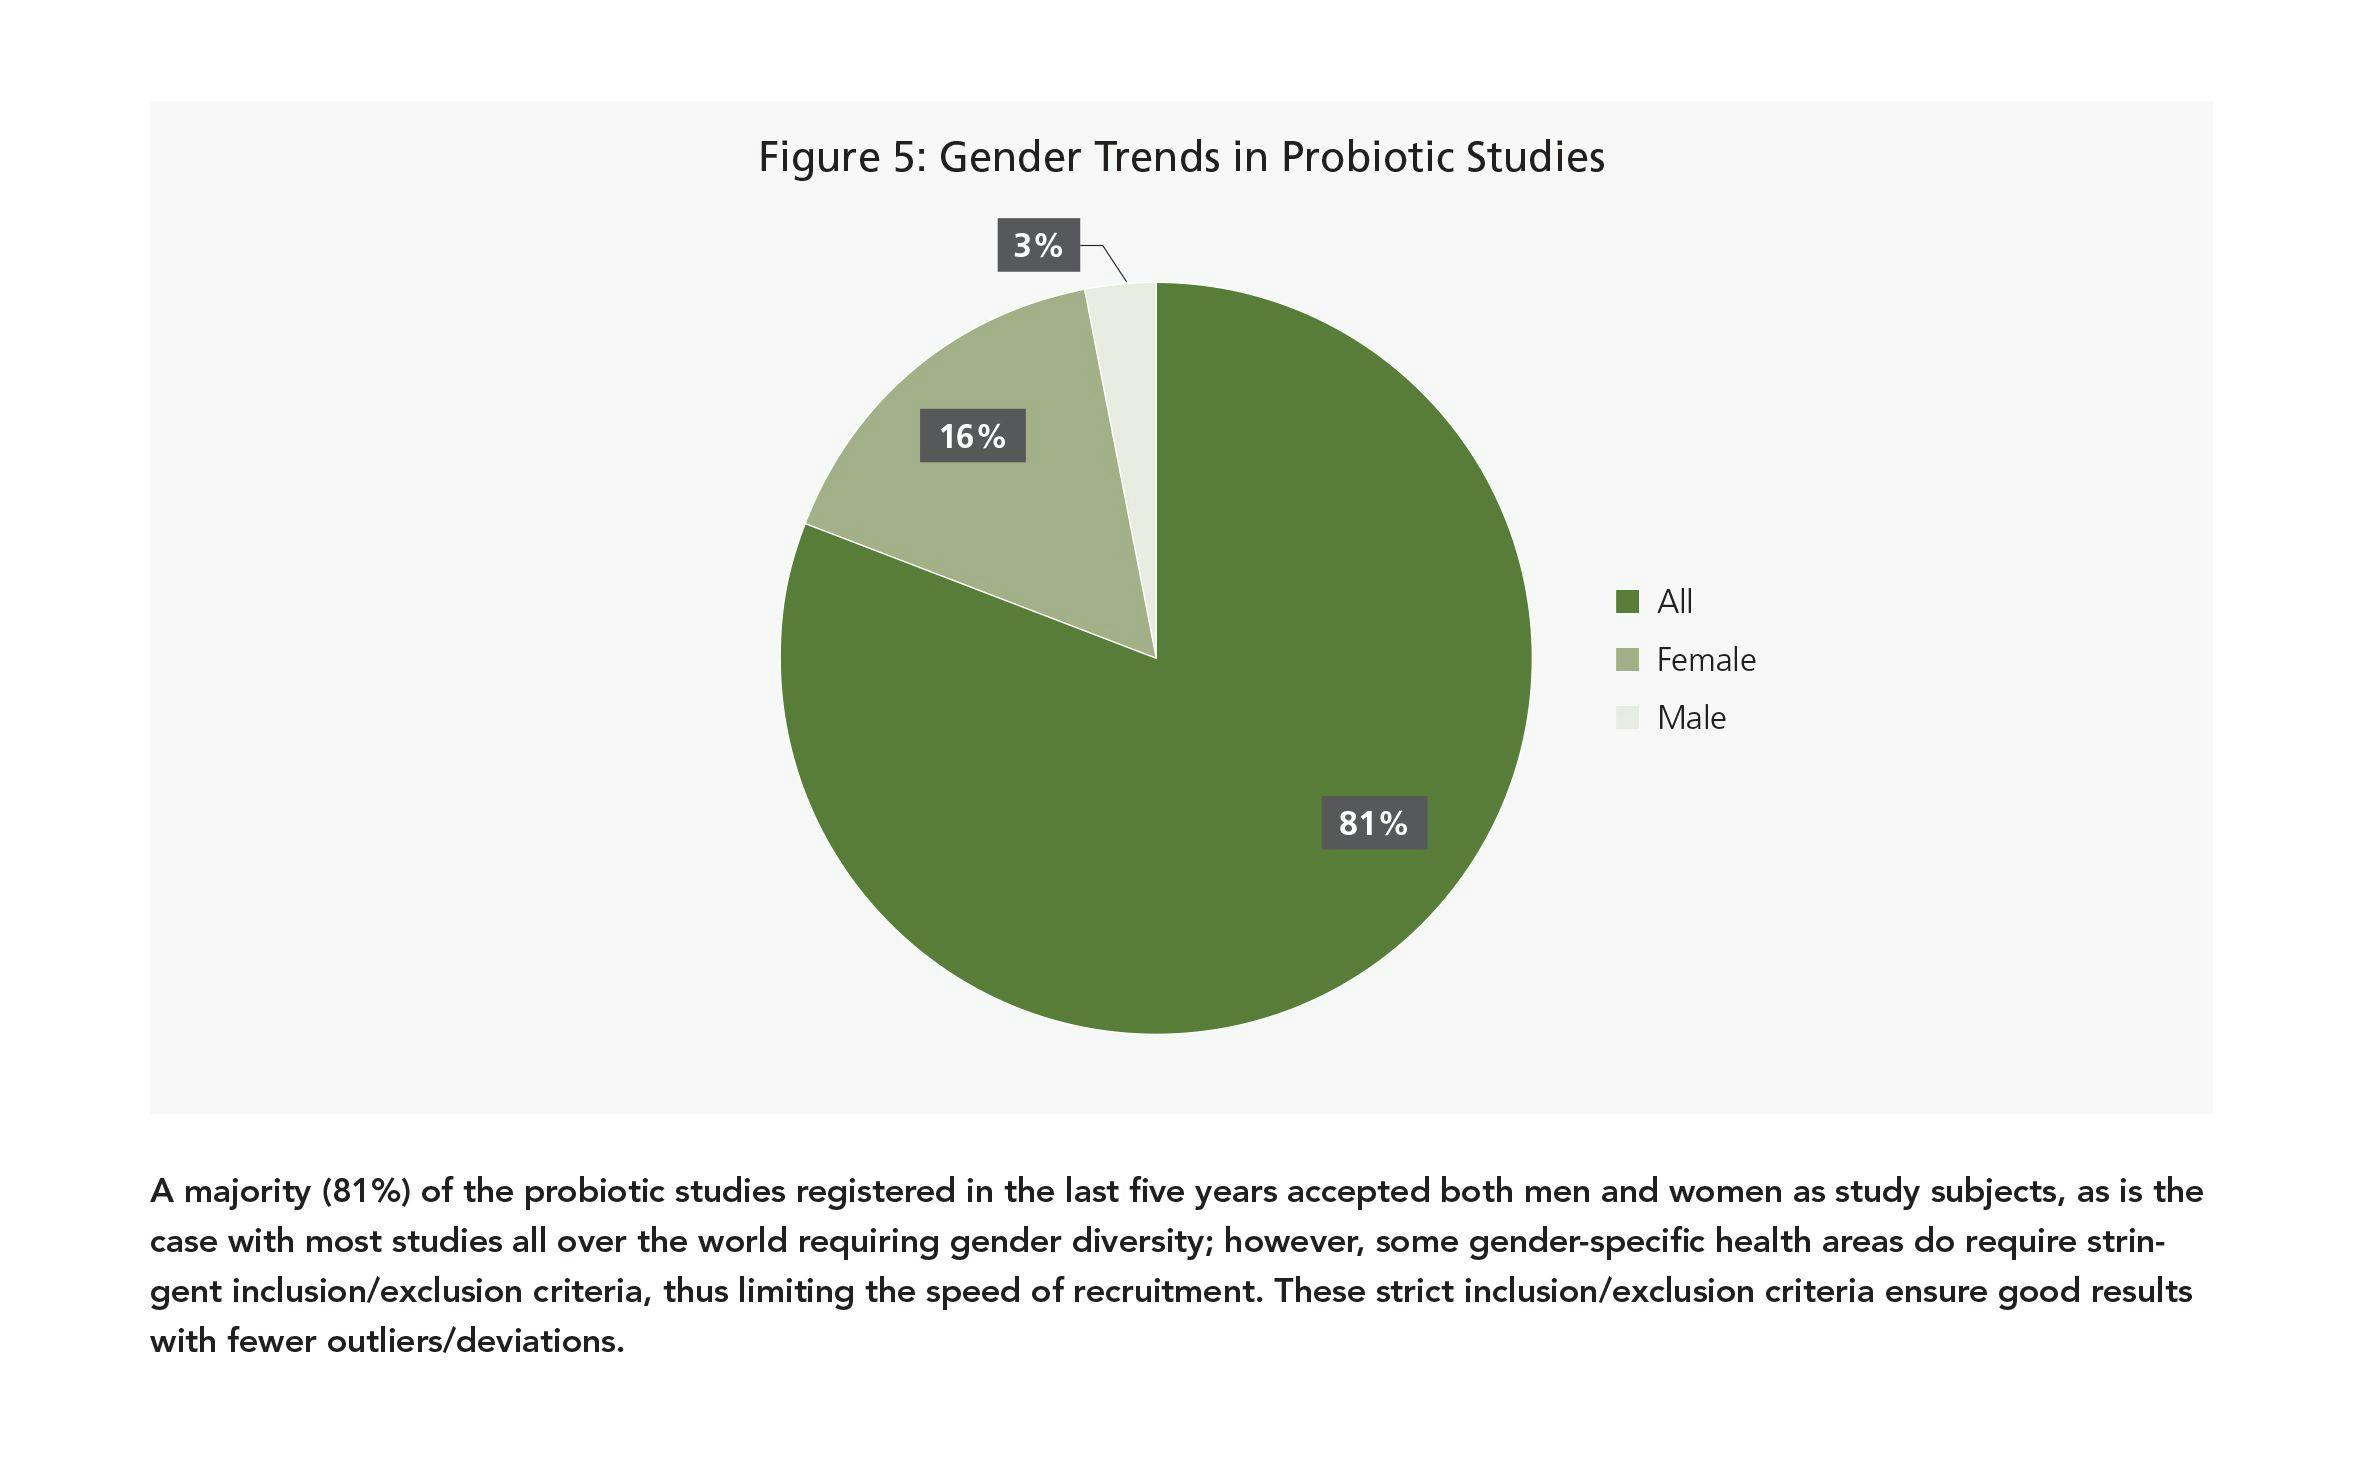 A majority (81%) of the probiotic studies registered in the last five years accepted both men and women as study subjects, as is the case with most studies all over the world requiring gender diversity; however, some gender-specific health areas do require stringent inclusion/exclusion criteria, thus limiting the speed of recruitment. These strict inclusion/exclusion criteria ensure good results with fewer outliers/deviations.